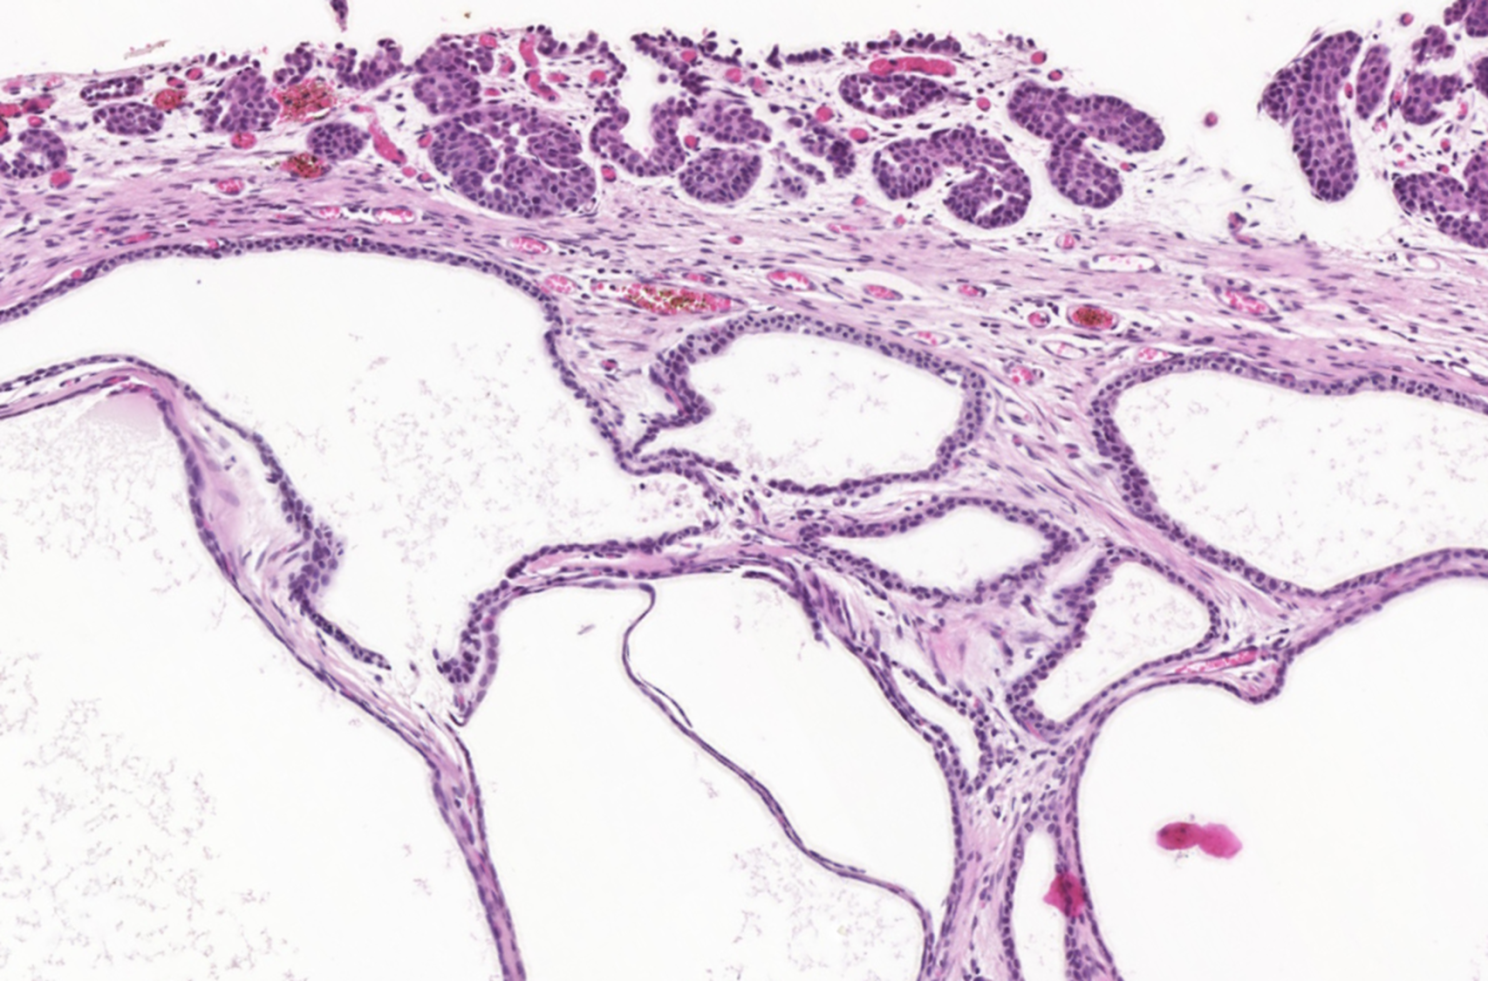 A microscope view of a human tissue

Description automatically generated